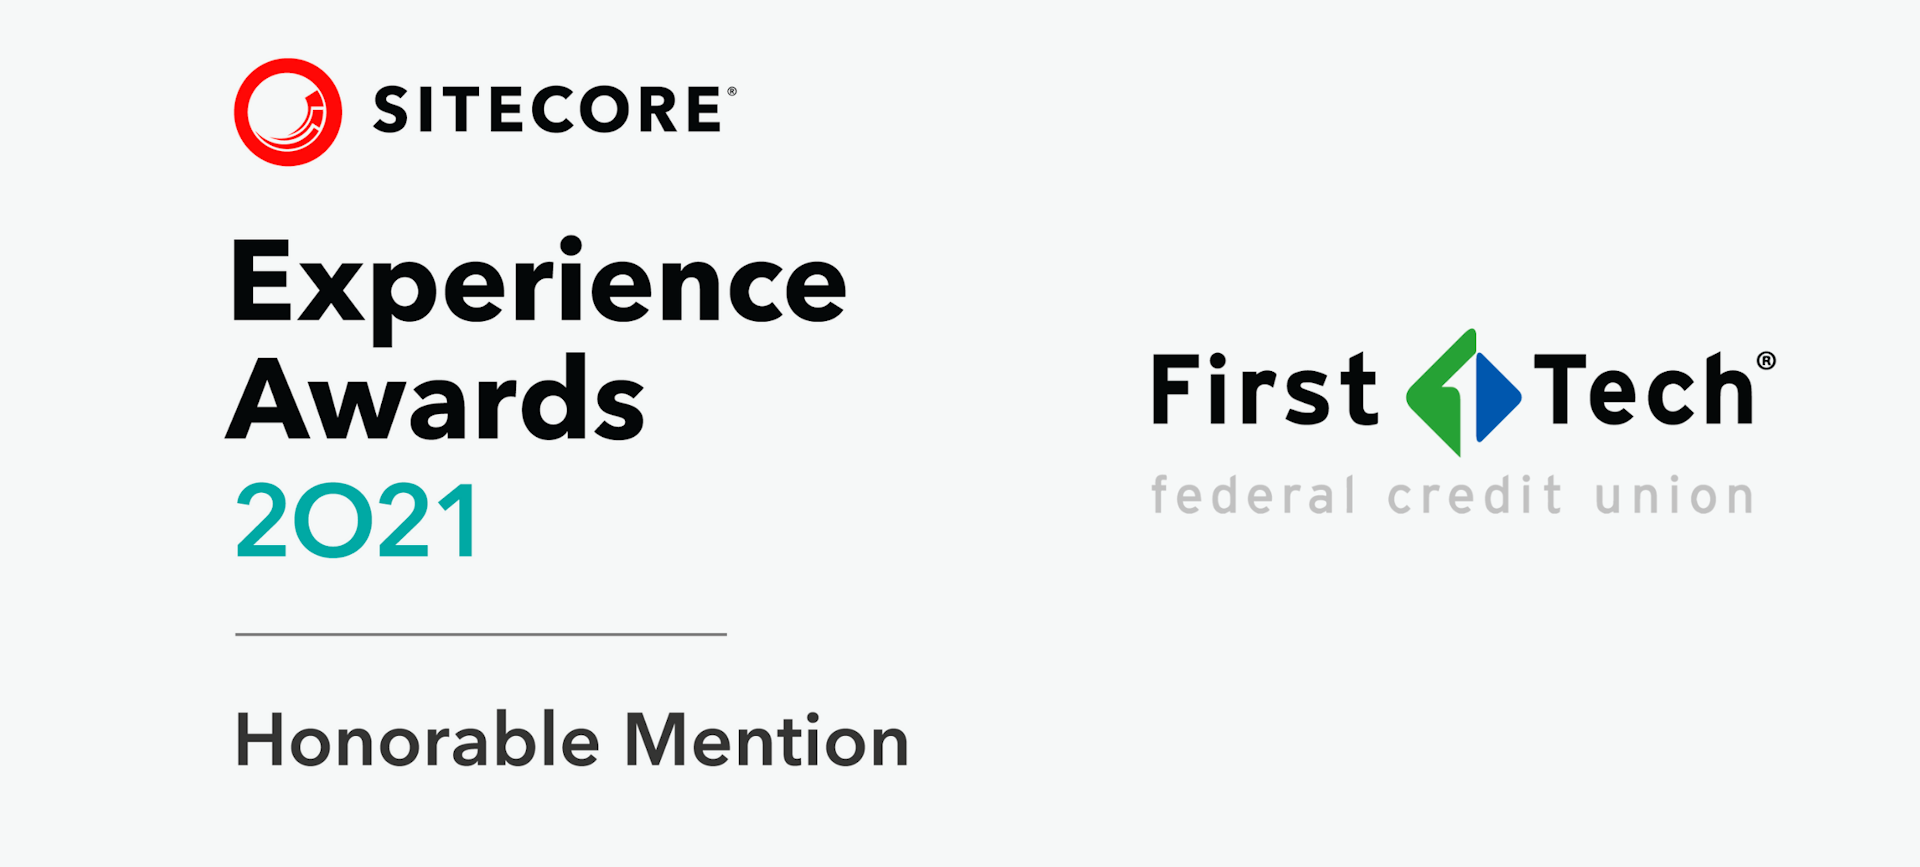 Sitecore Experience Awards 2021 Honorable Mention/First Tech Federal Credit Union logo